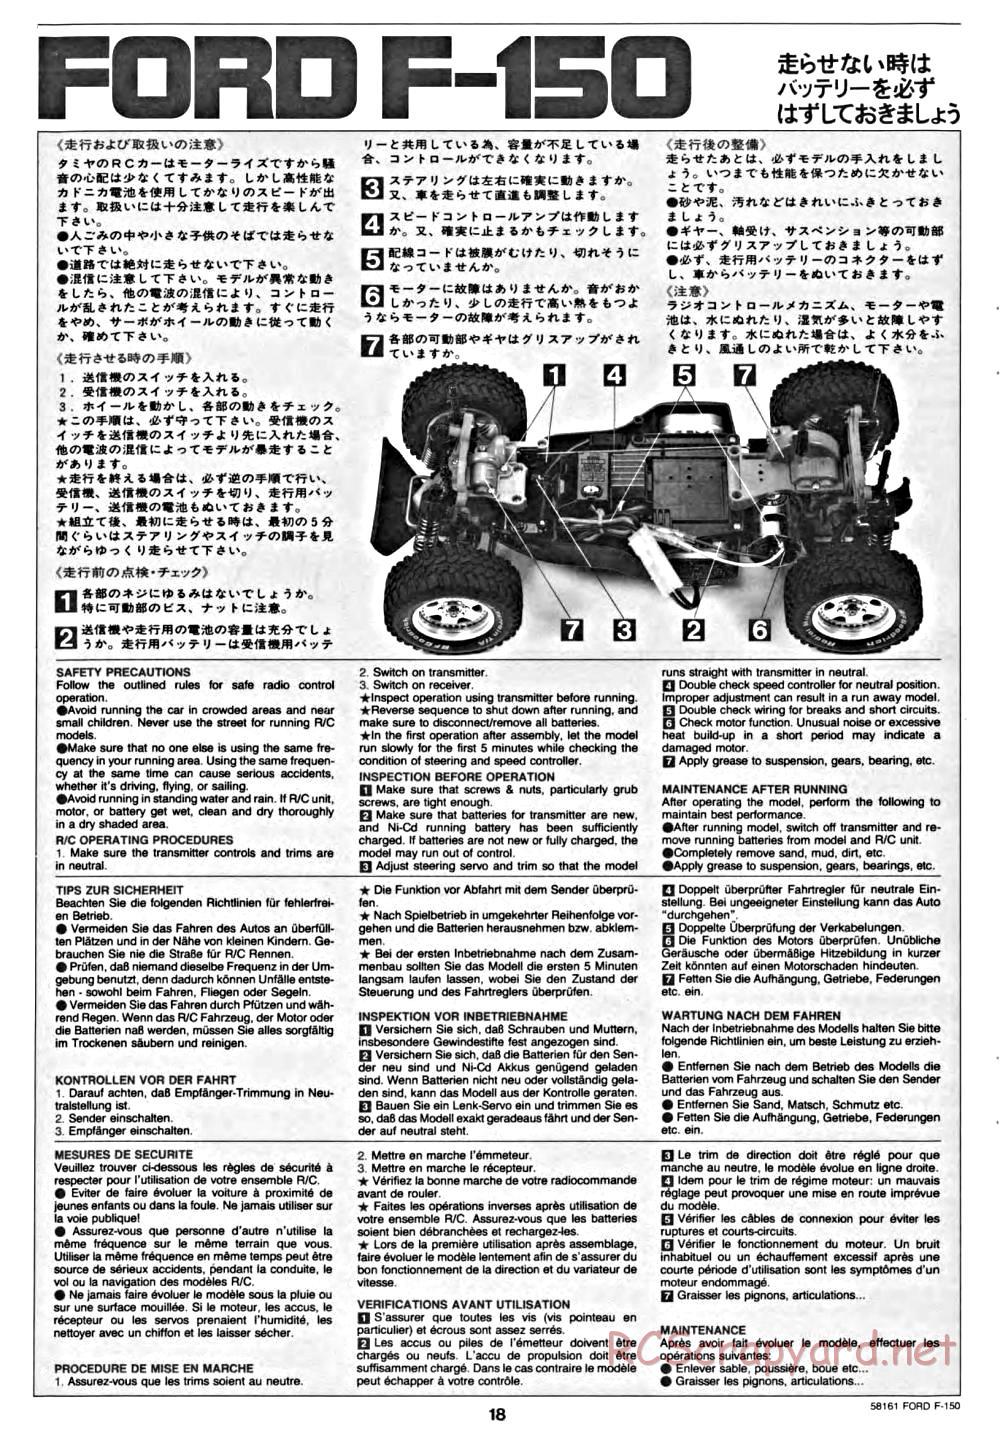 Tamiya - Ford F-150 Truck Chassis - Manual - Page 18